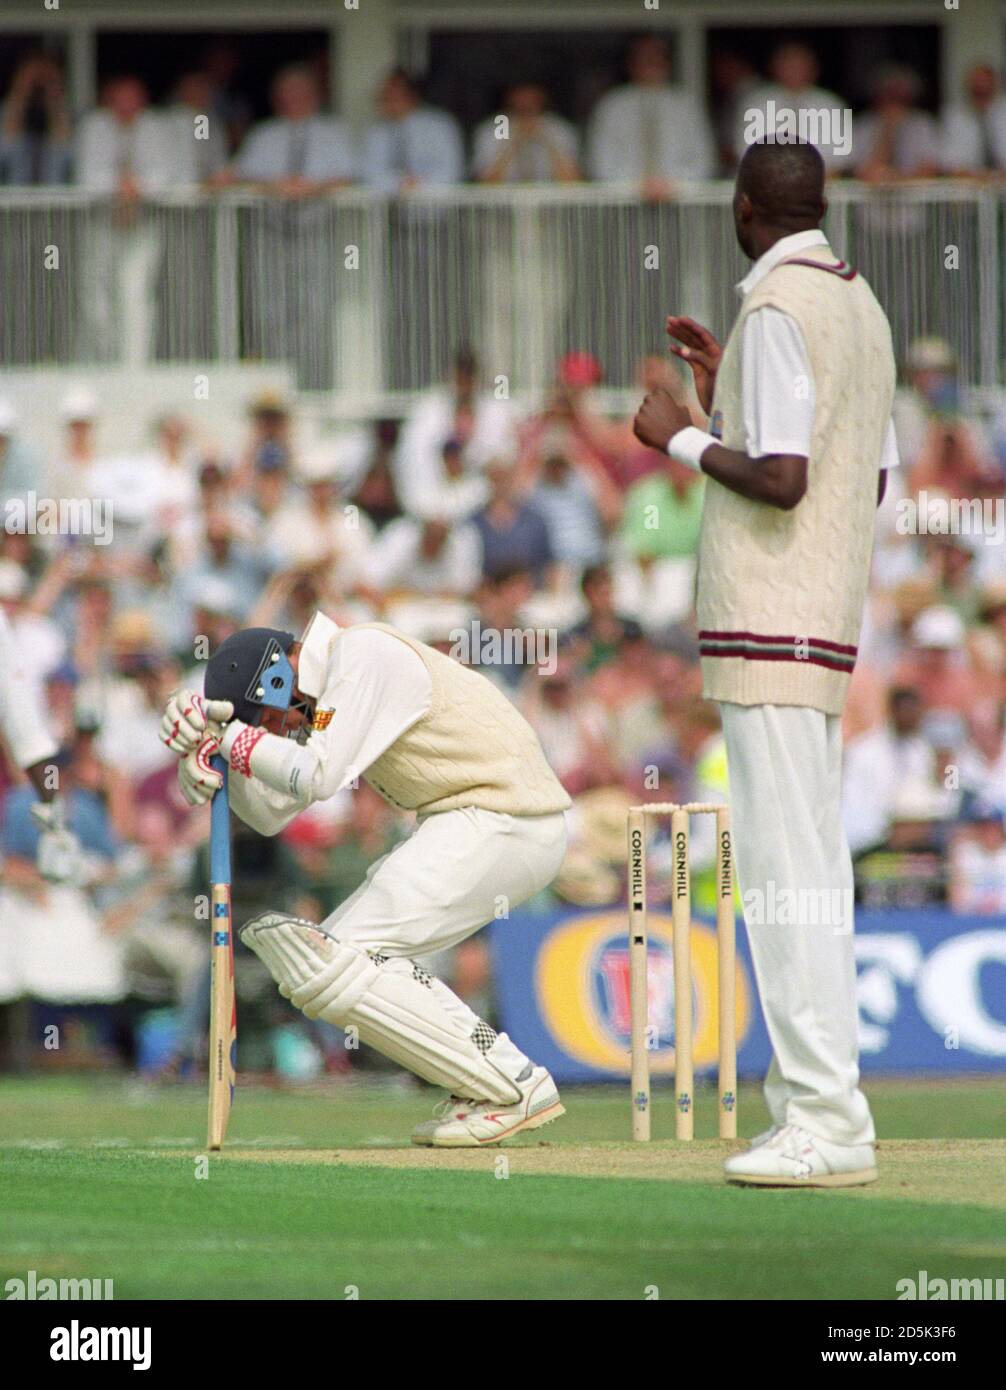 Mike Atherton, England, is hit off a West Indies bouncer Stock Photo